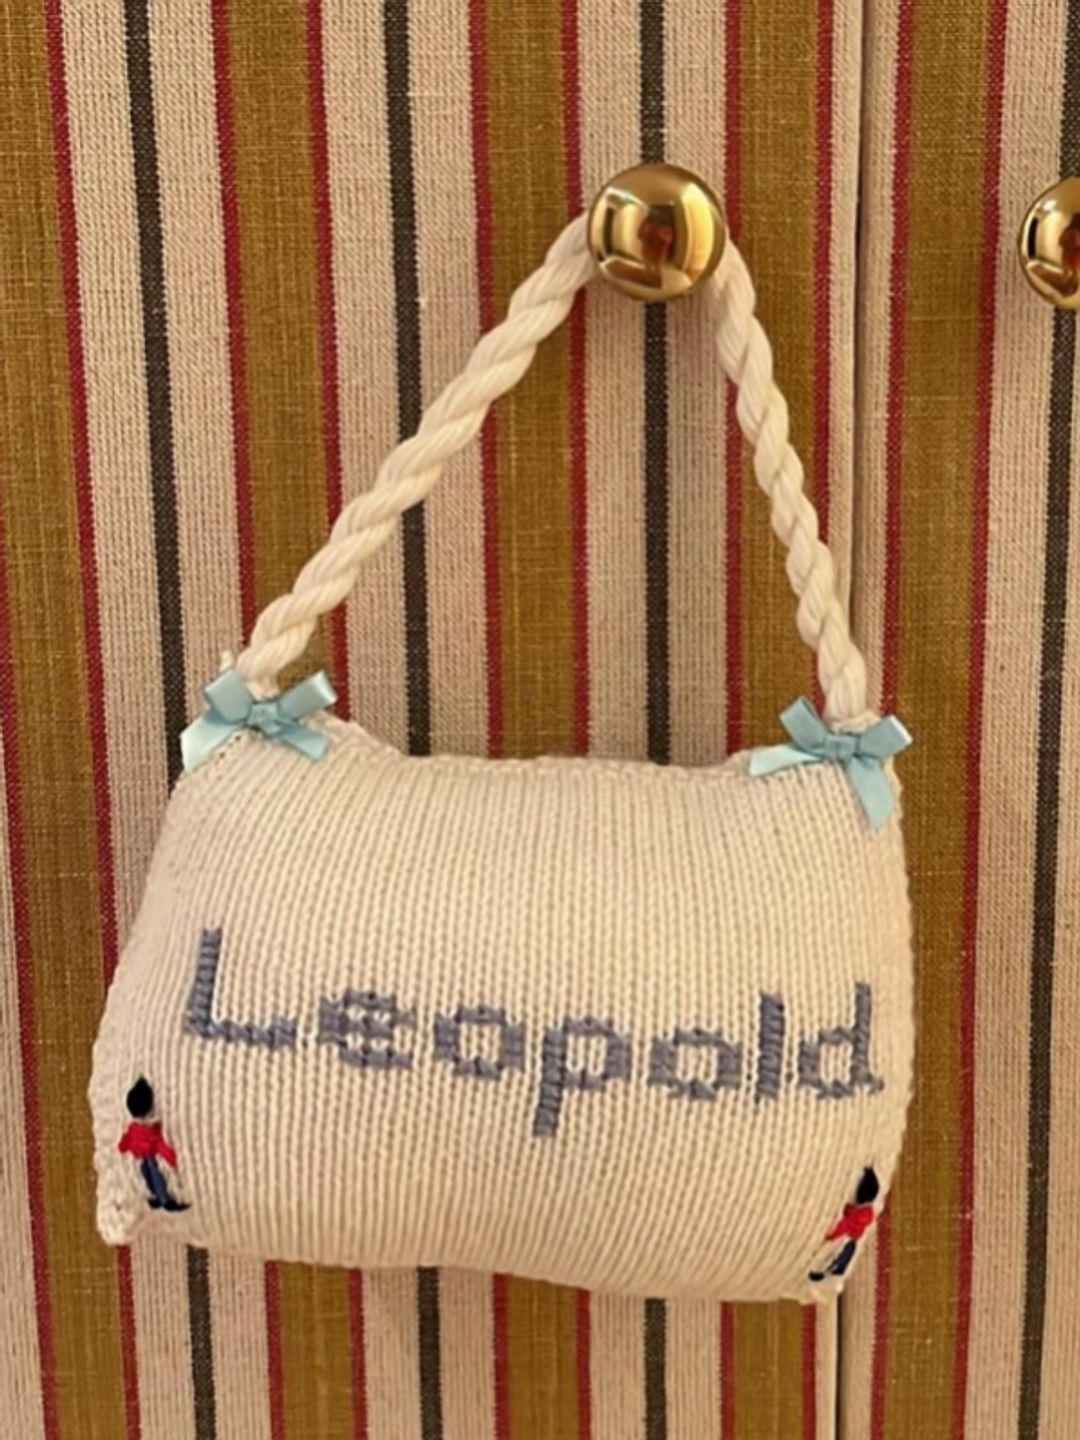 A knitted bag with the word Leopold